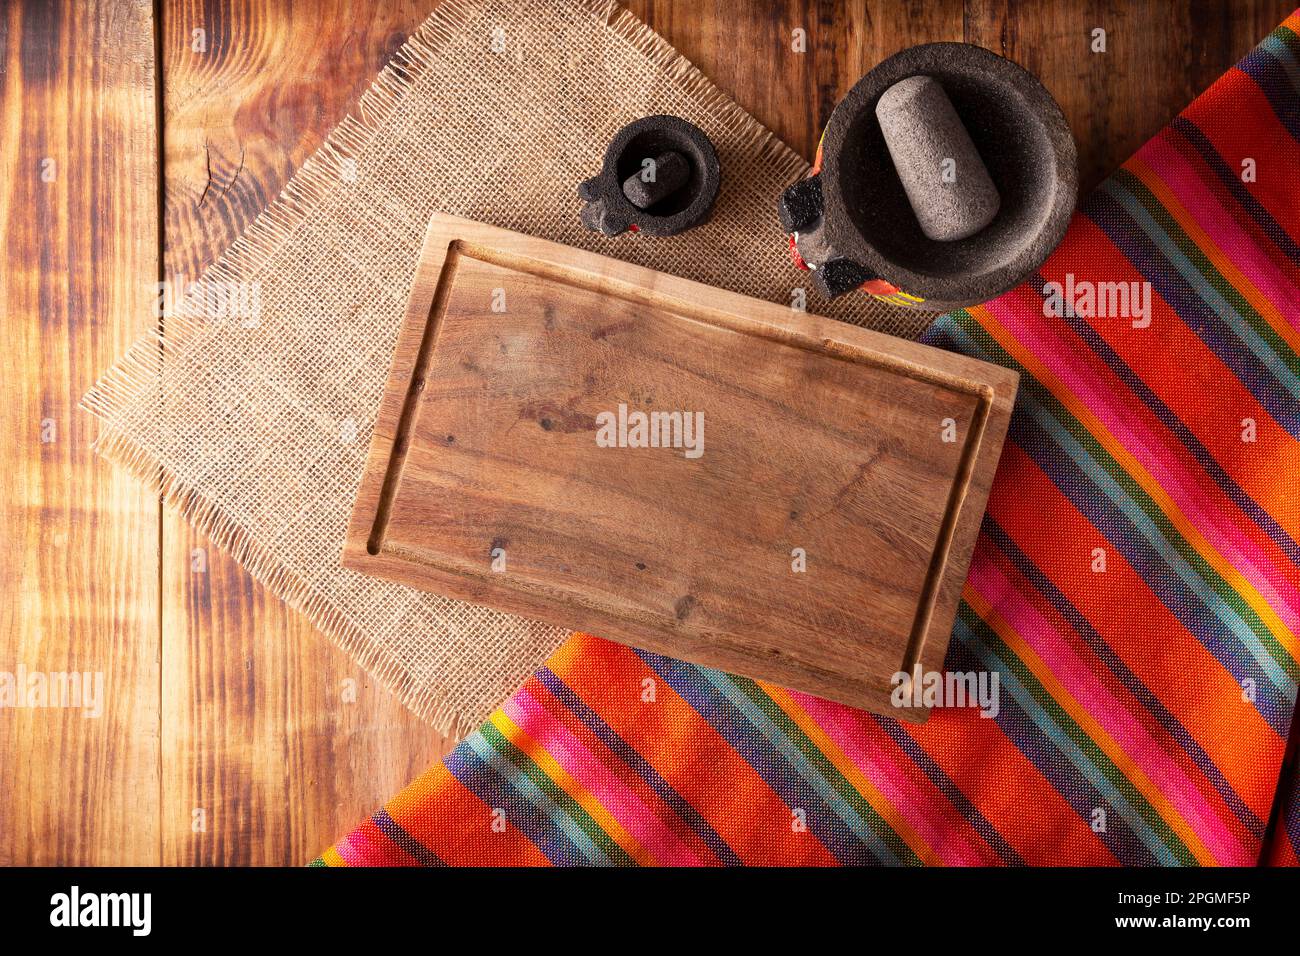 Rustic kitchen concept background. Stone molcajetes and cutting board on rustic wooden table. Table top view. Stock Photo